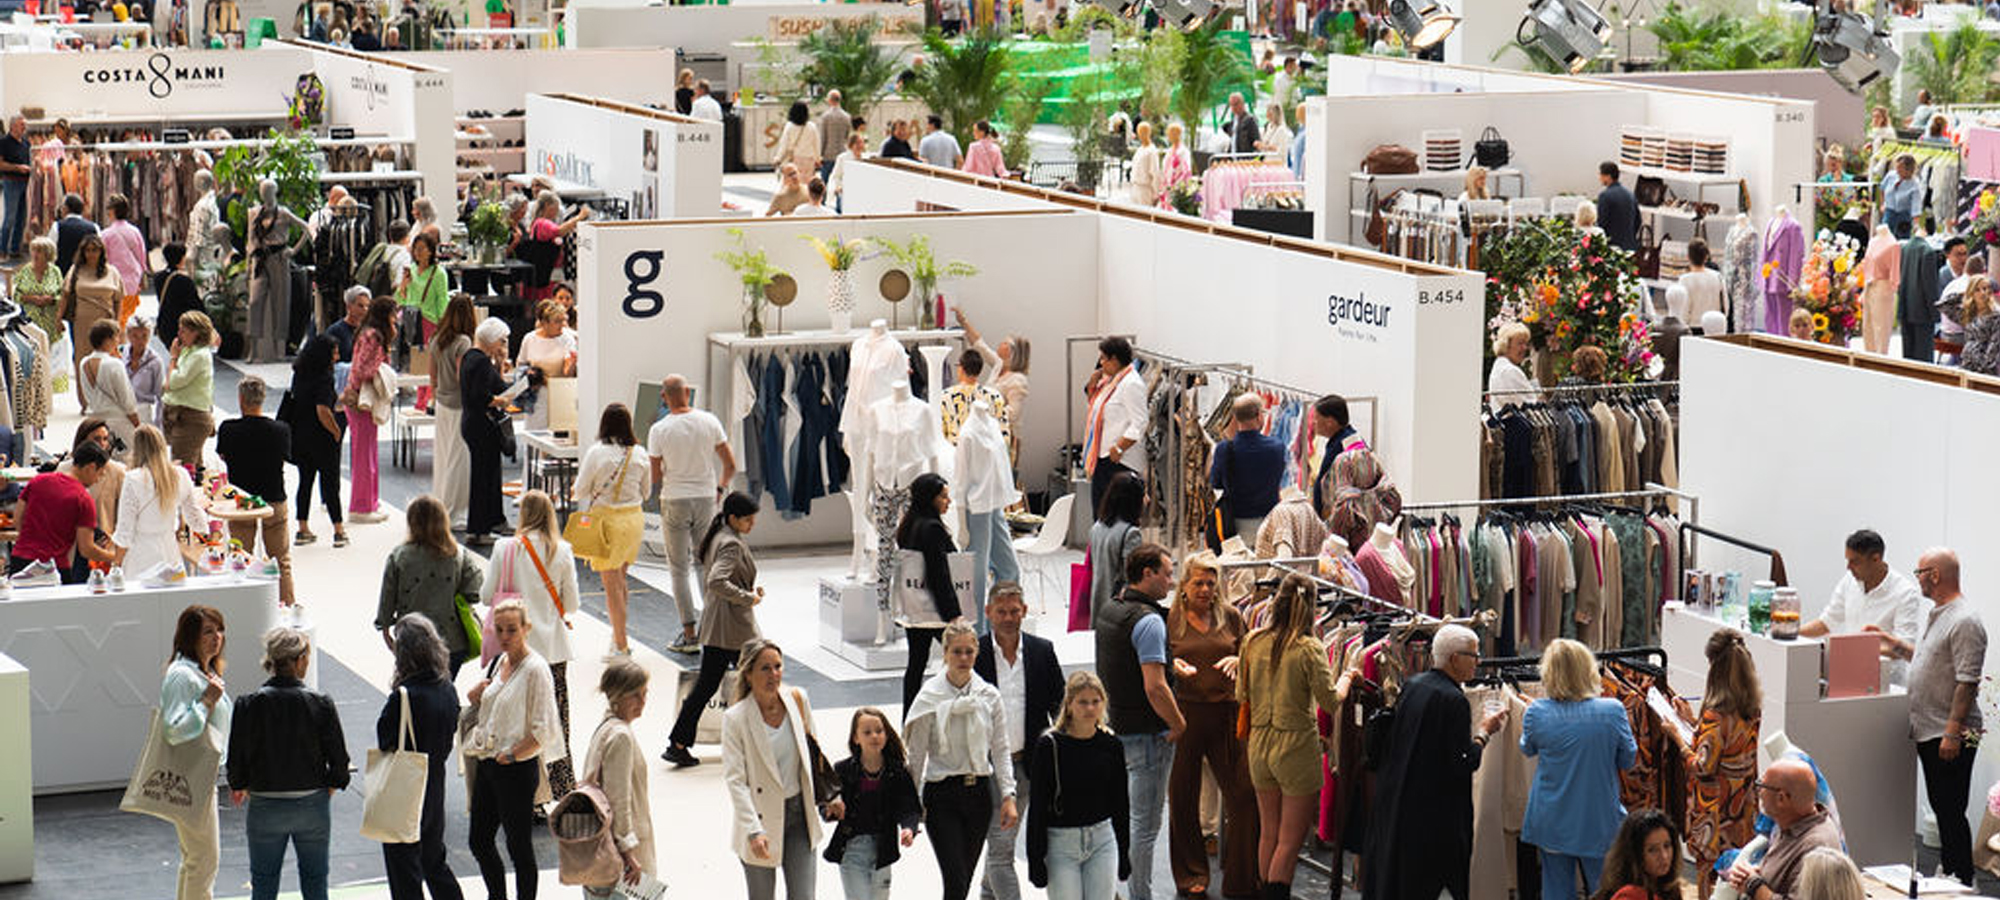 Together again! Modefabriek reunites fashion industry: top attendance at 2022 edition